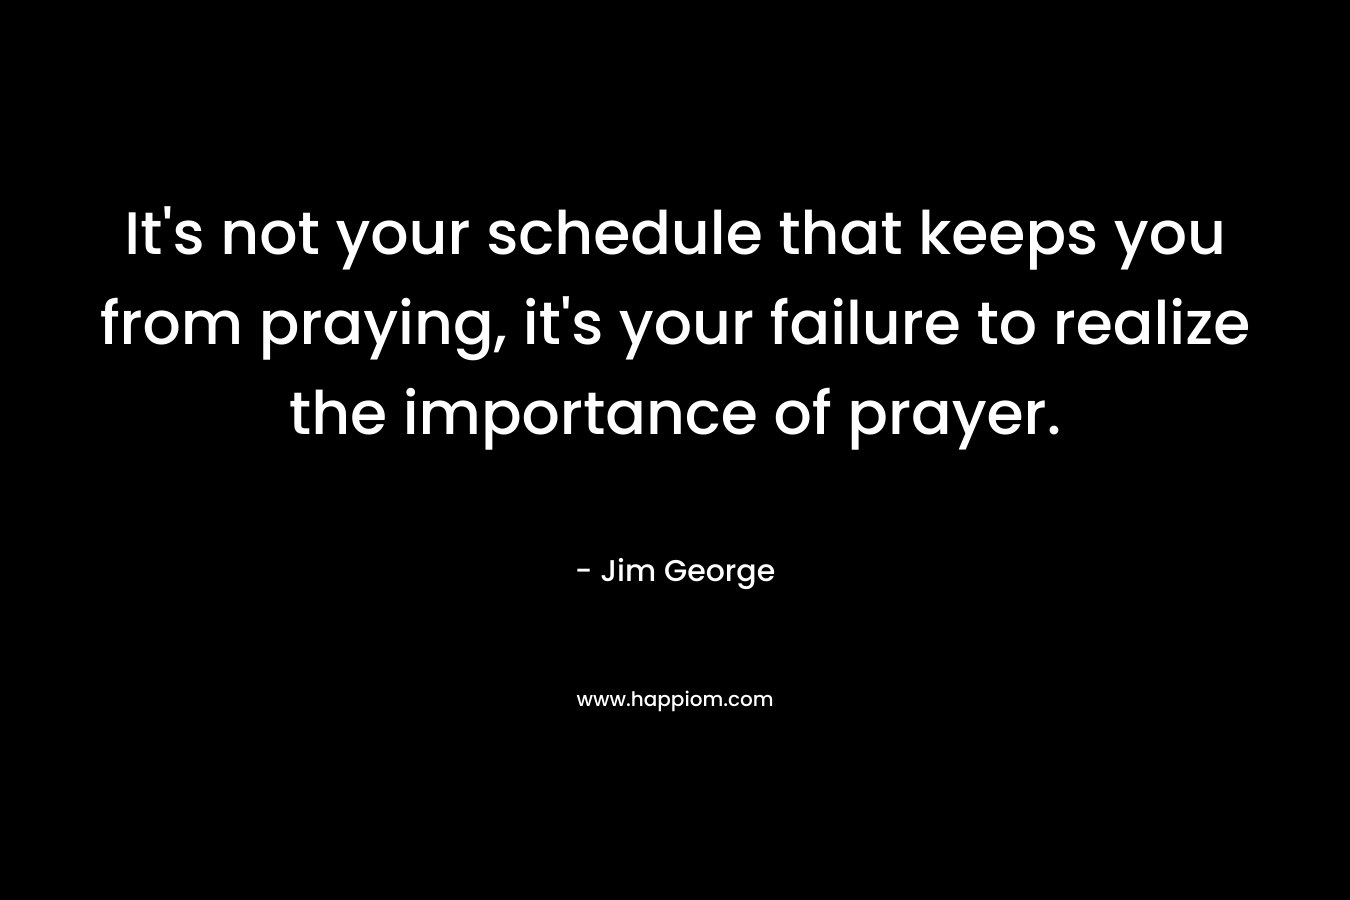 It's not your schedule that keeps you from praying, it's your failure to realize the importance of prayer.